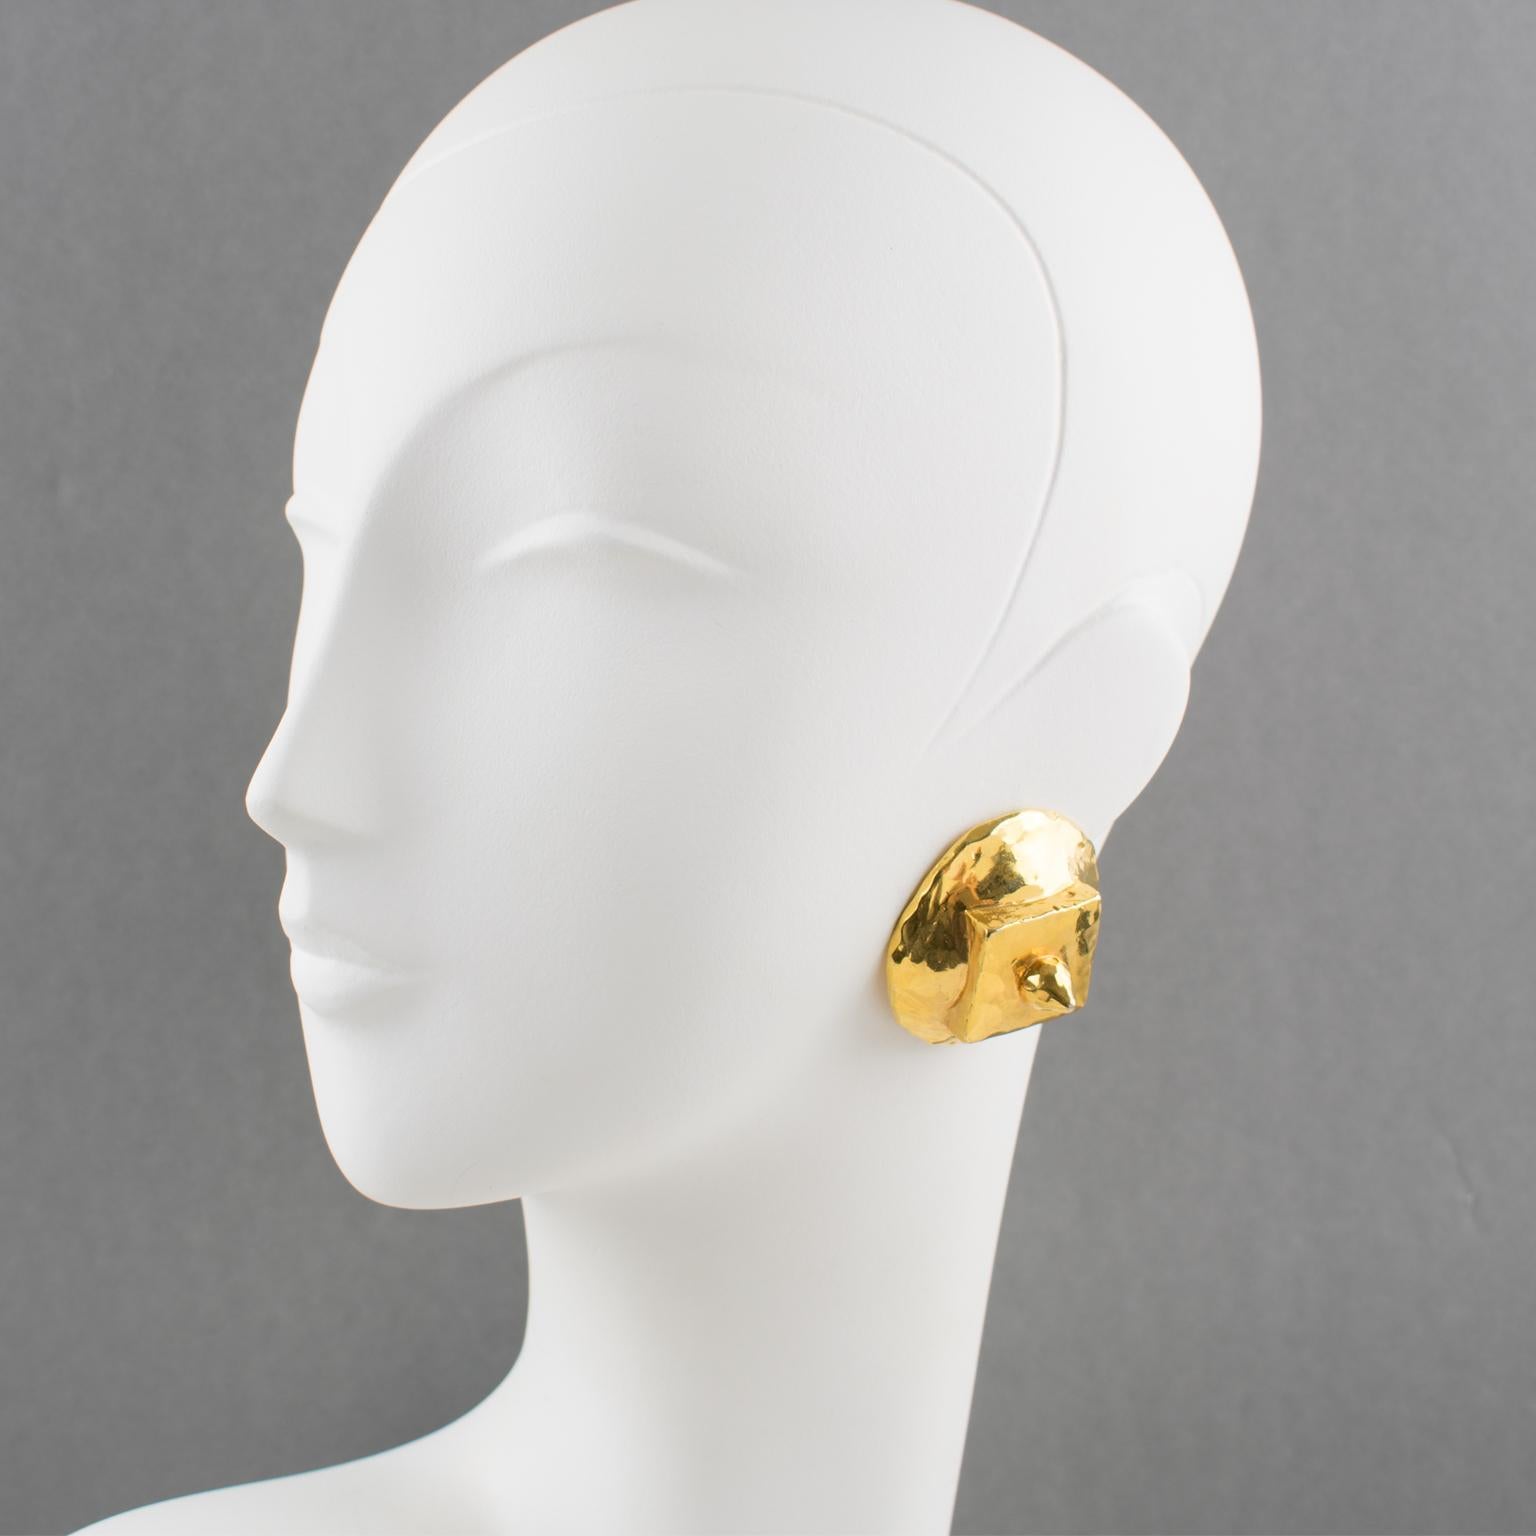 Stunning French designer Alexis Lahellec Paris signed clip-on earrings. Unusual futurist pieces featuring a large rounded and domed shape with geometric structure in gilt coated resin all textured with a hand-made feel. Signed underside: 'Alexis